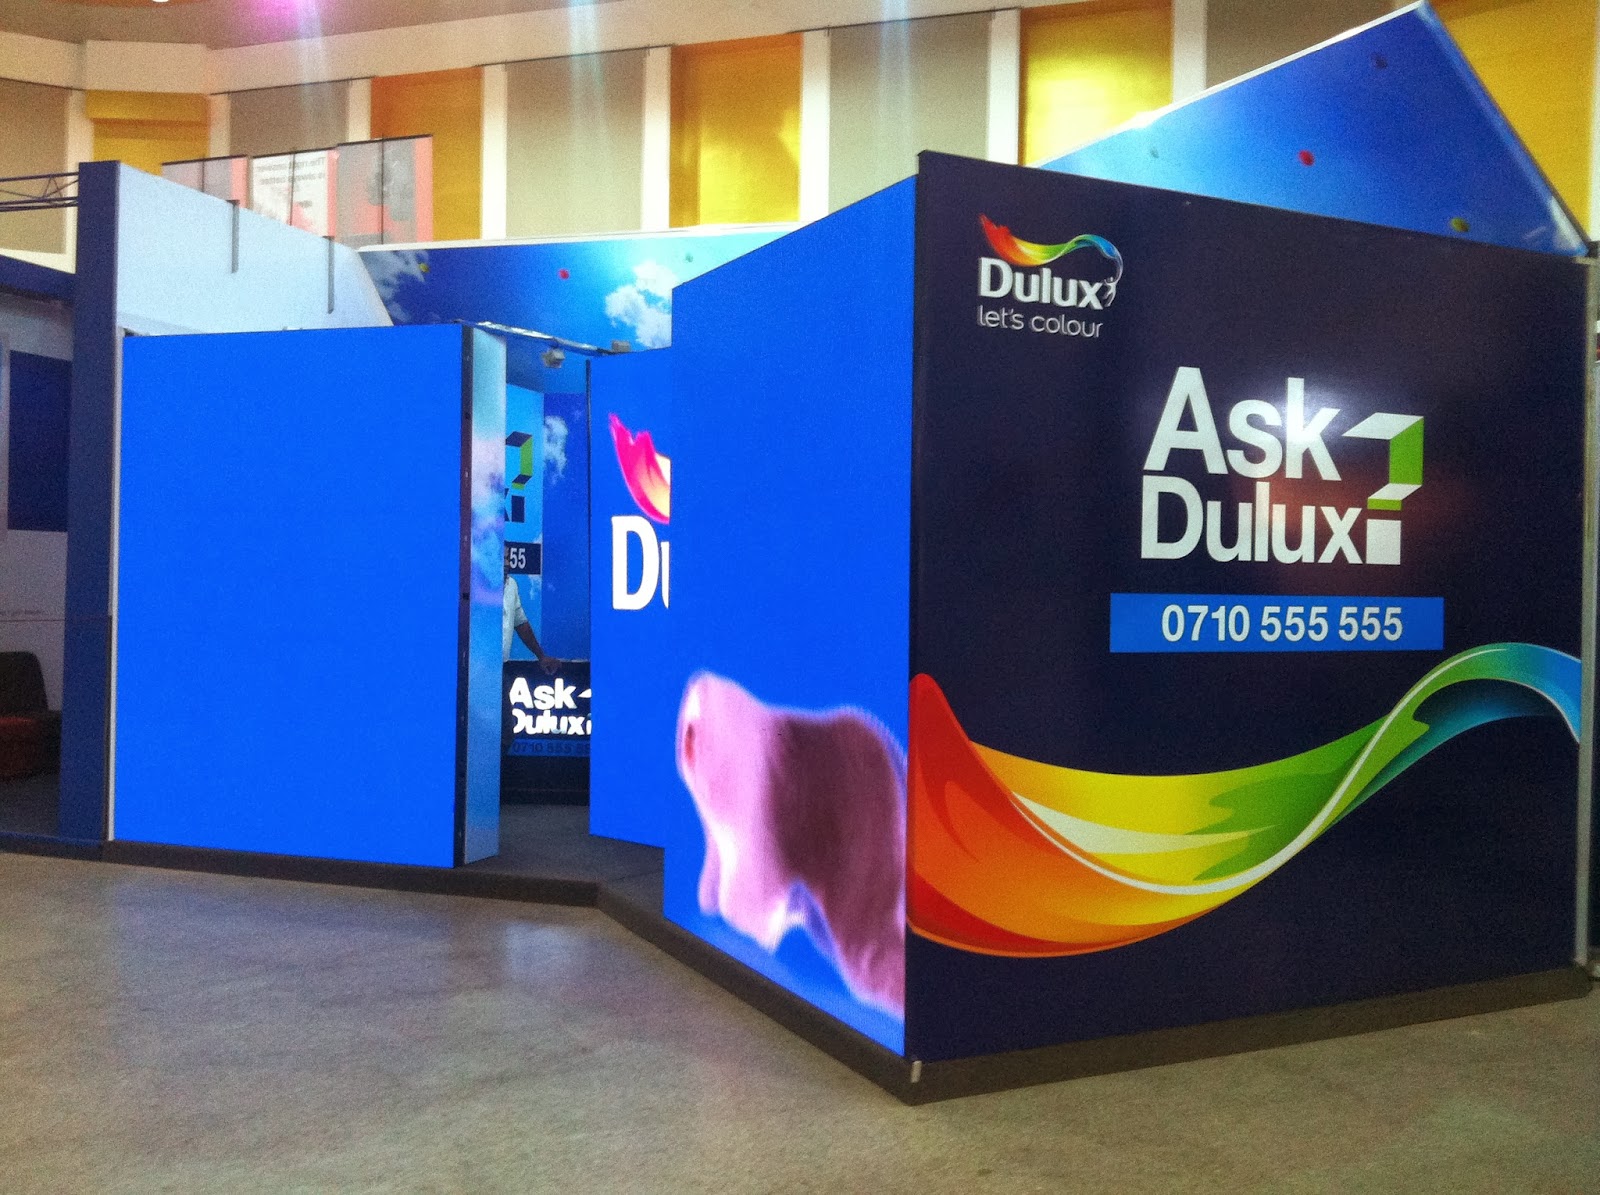 The Ask Dulux consultation lounge at The Architect 2014.